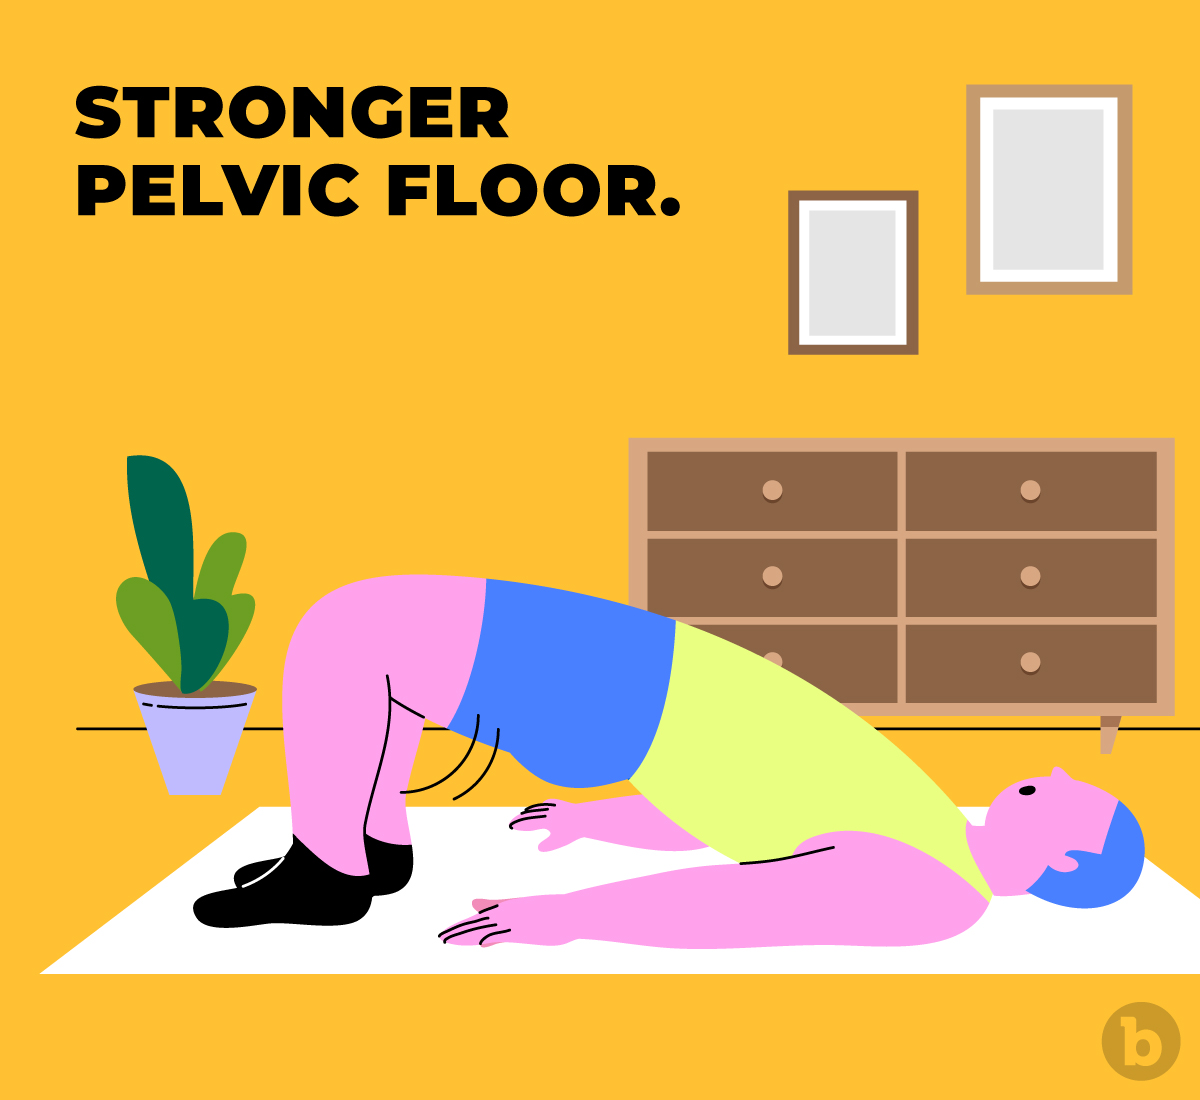 Kegel exercises and sex can strengthen your pelvic floor muscles